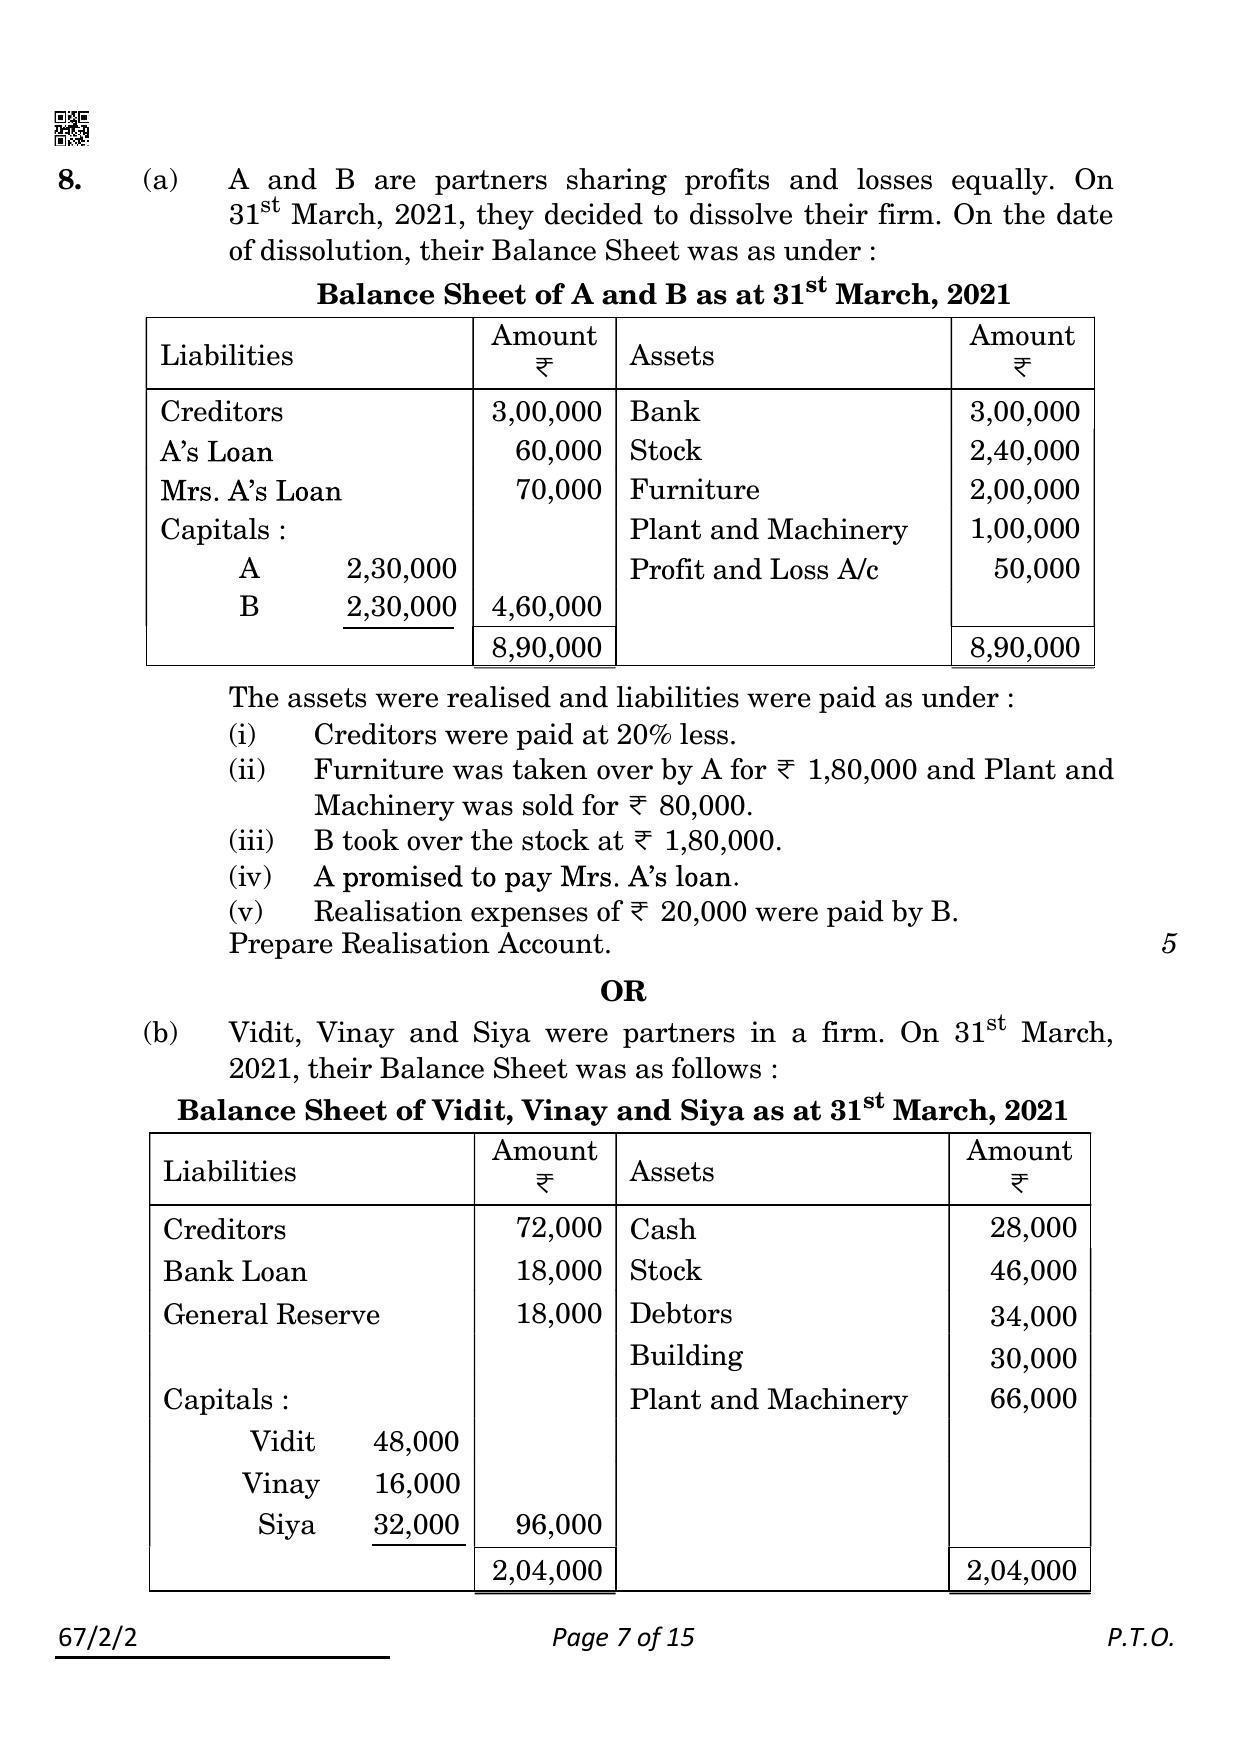 CBSE Class 12 67-2-2 Accountancy 2022 Question Paper - Page 7